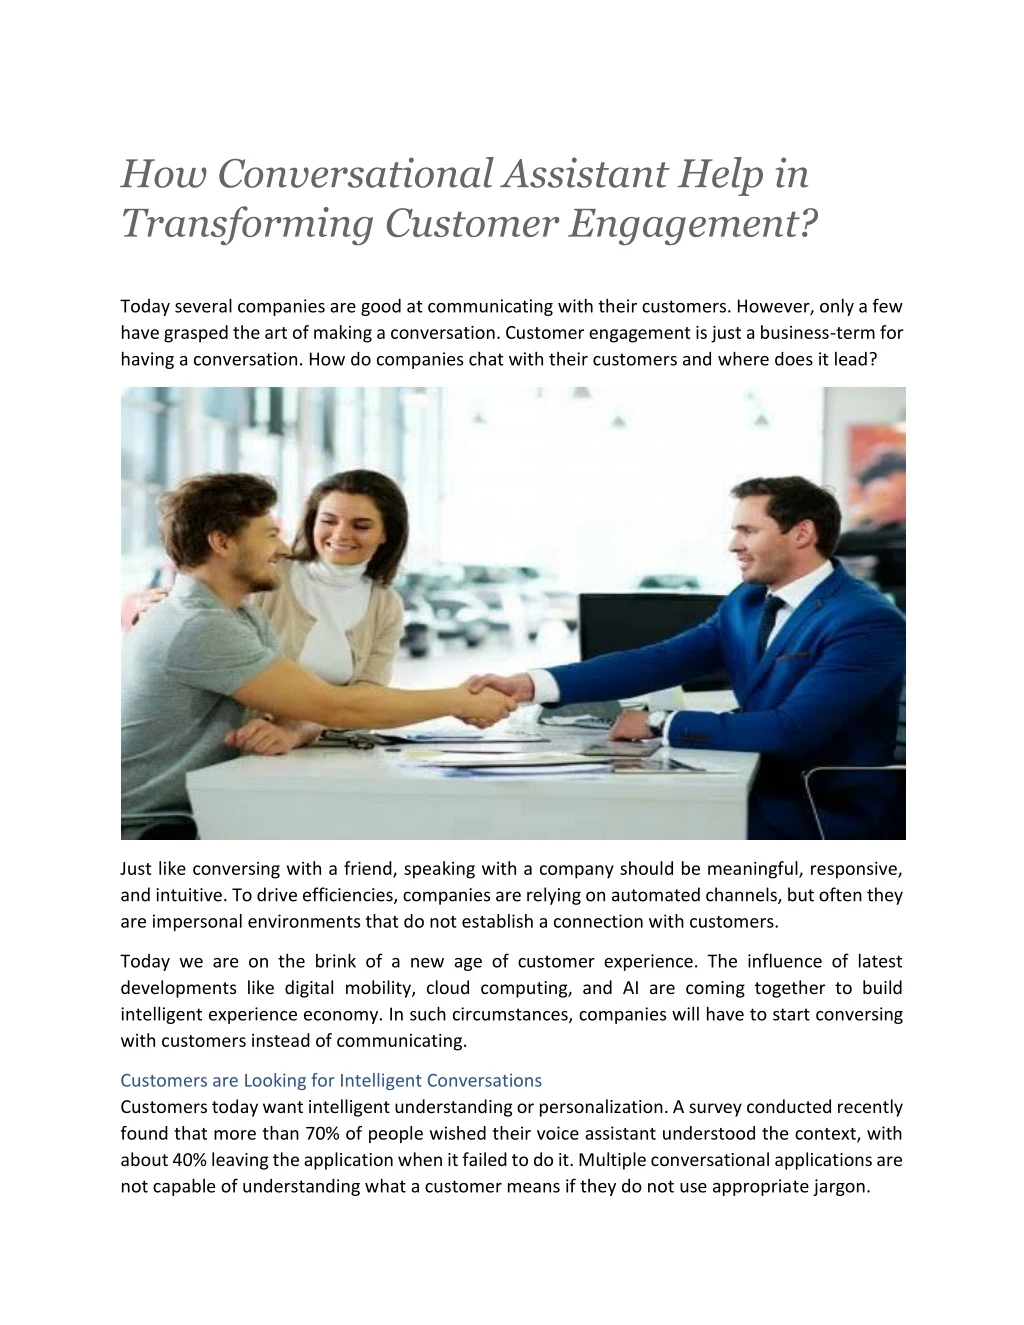 how conversational assistant help in transforming